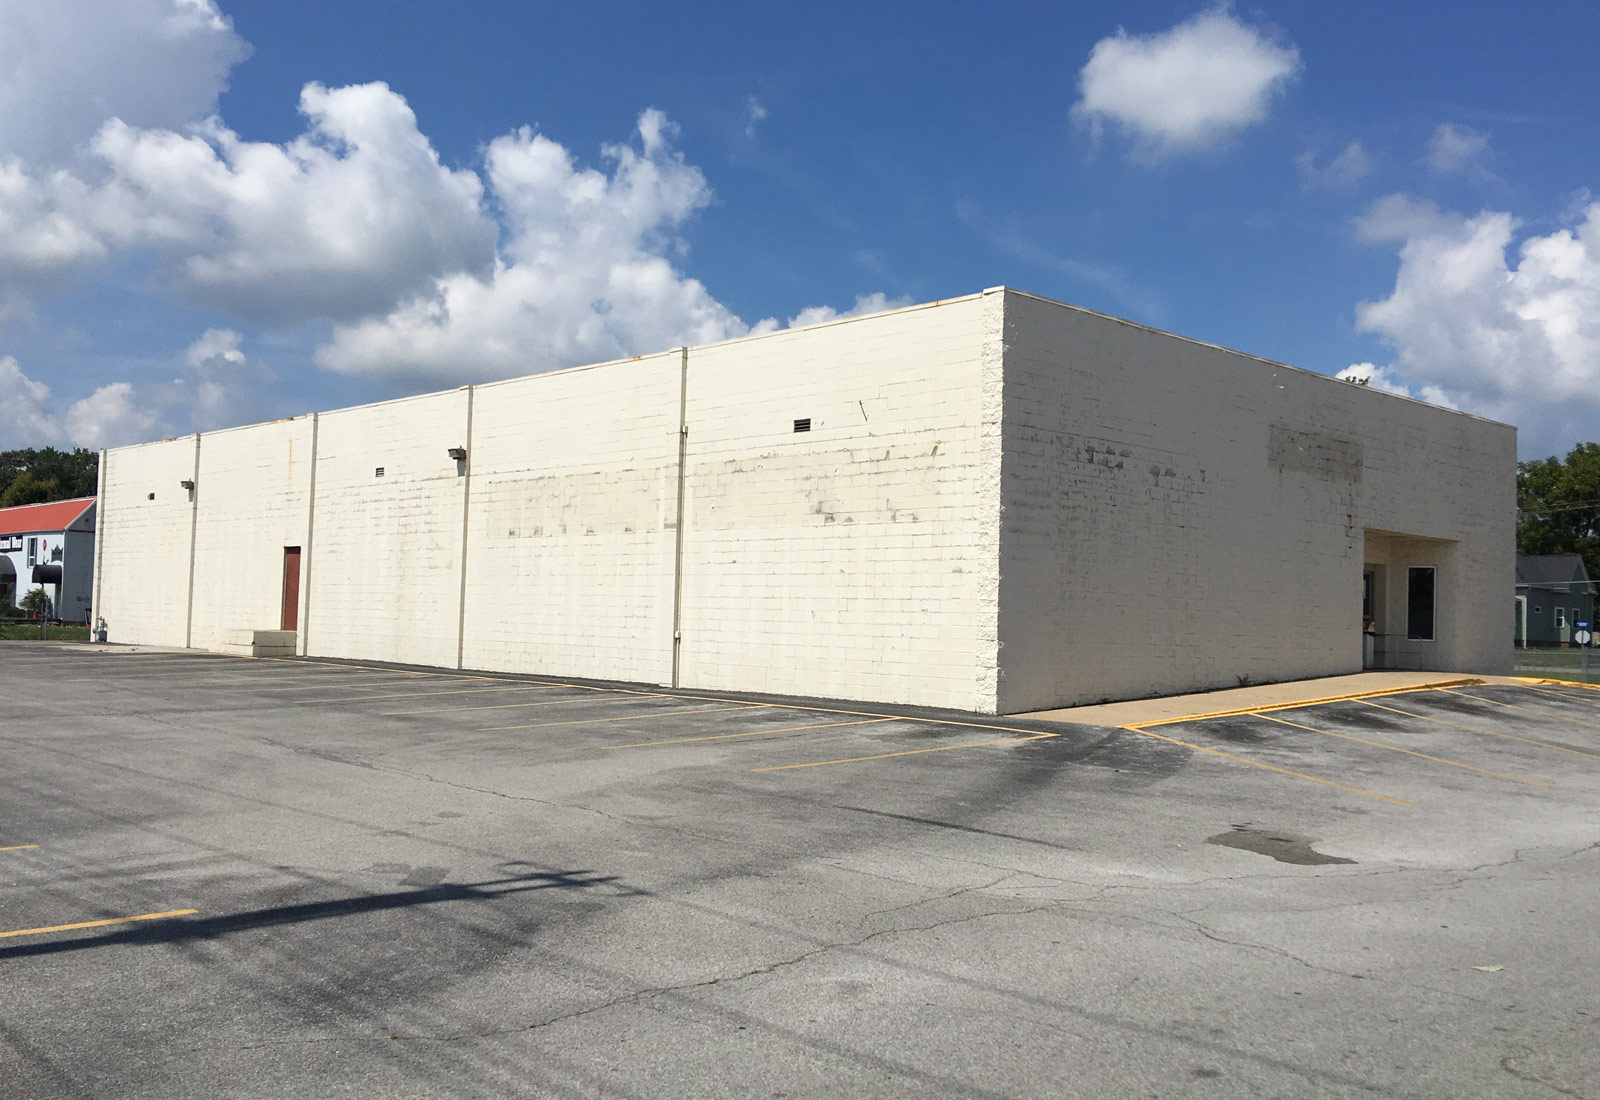 Luckys Liquors Building Before Remodel & Store Design